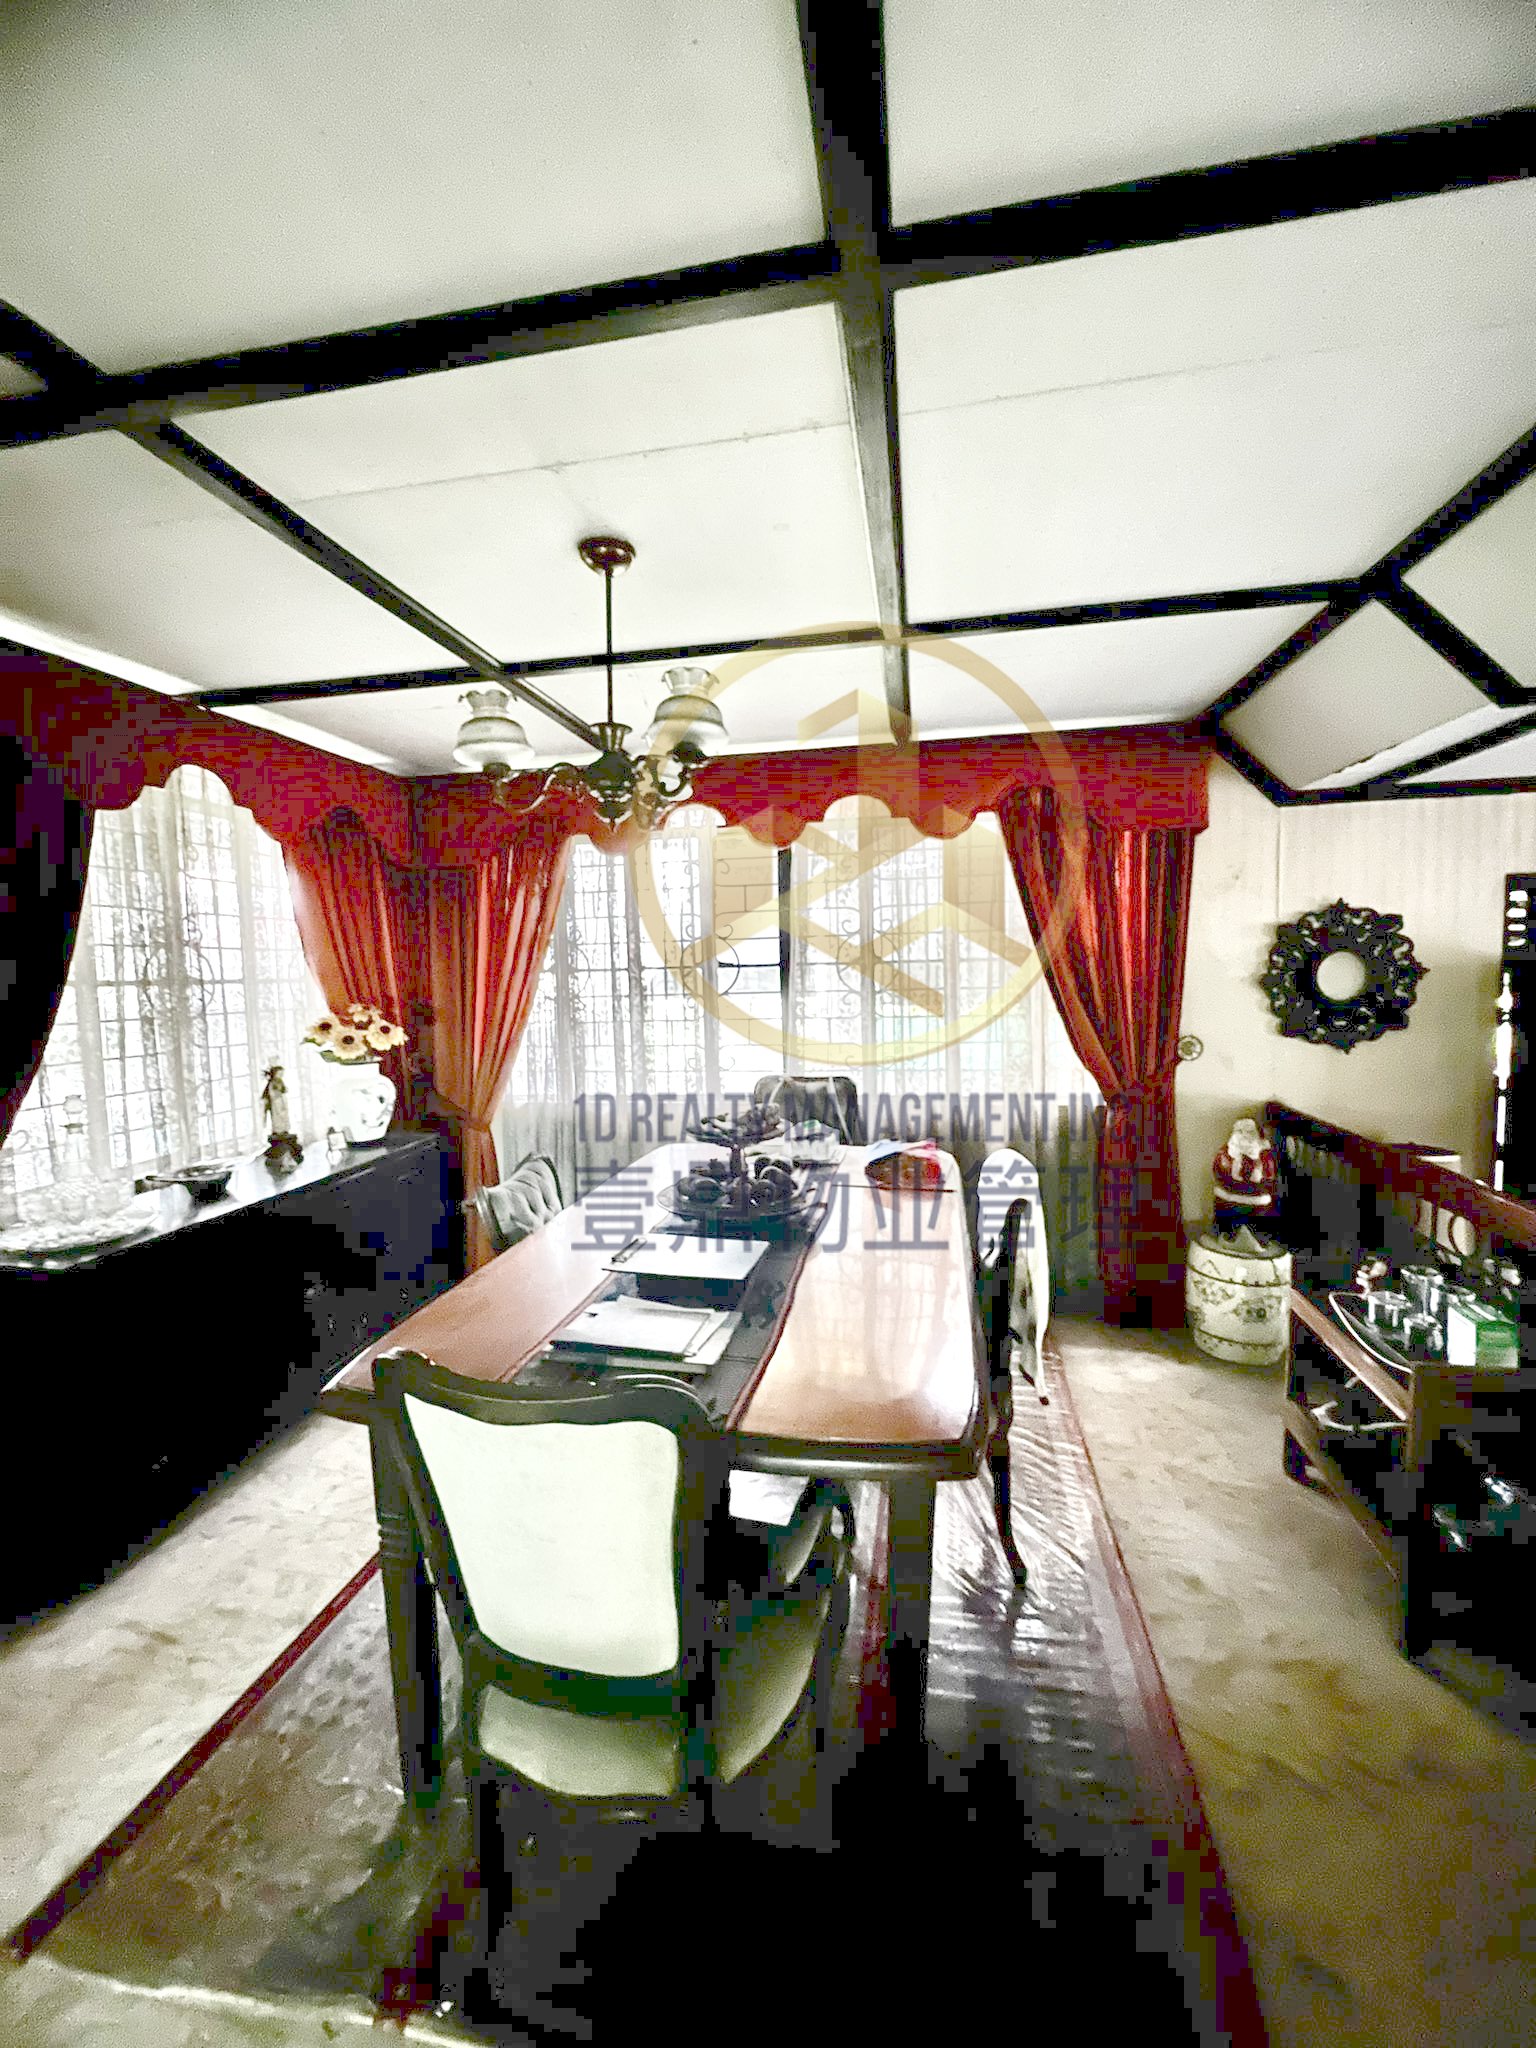 Greenpark Village - Cainta Rizal - For Sale House & Lot